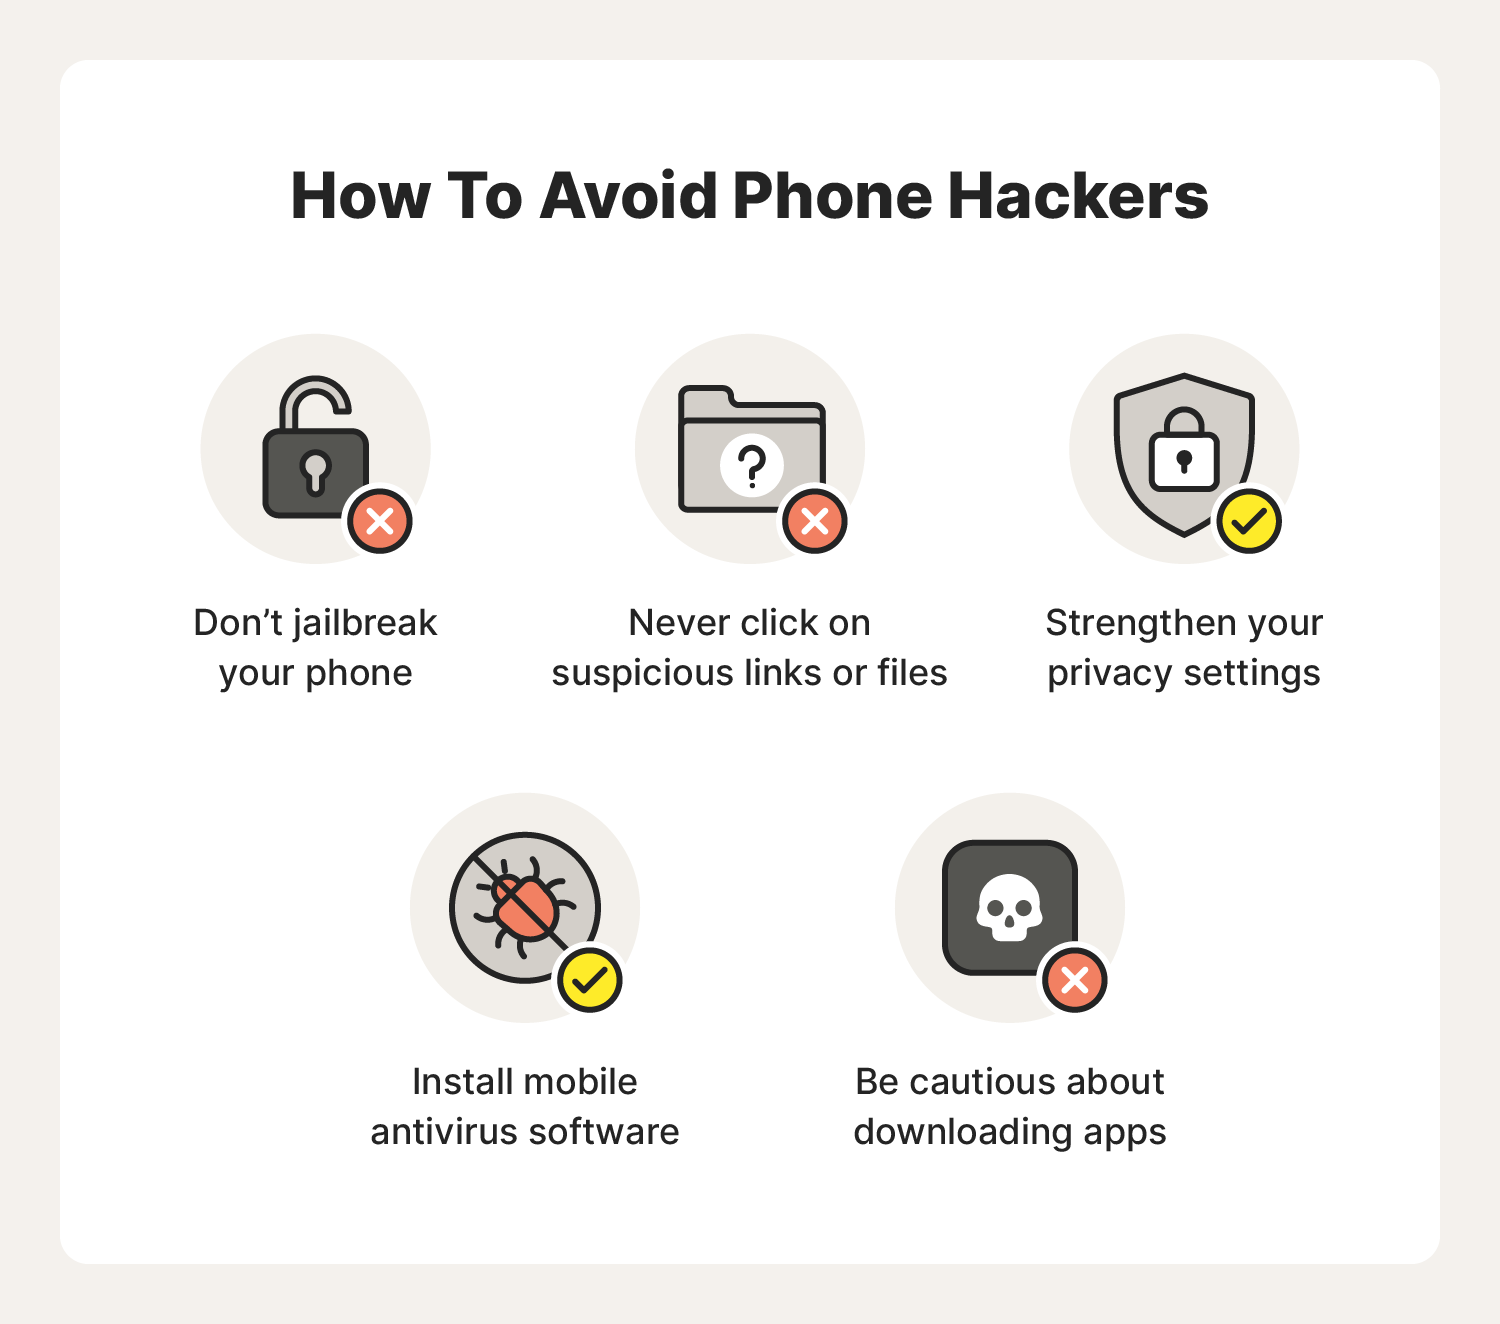 An image sharing a few tips on how to avoid phone hackers.